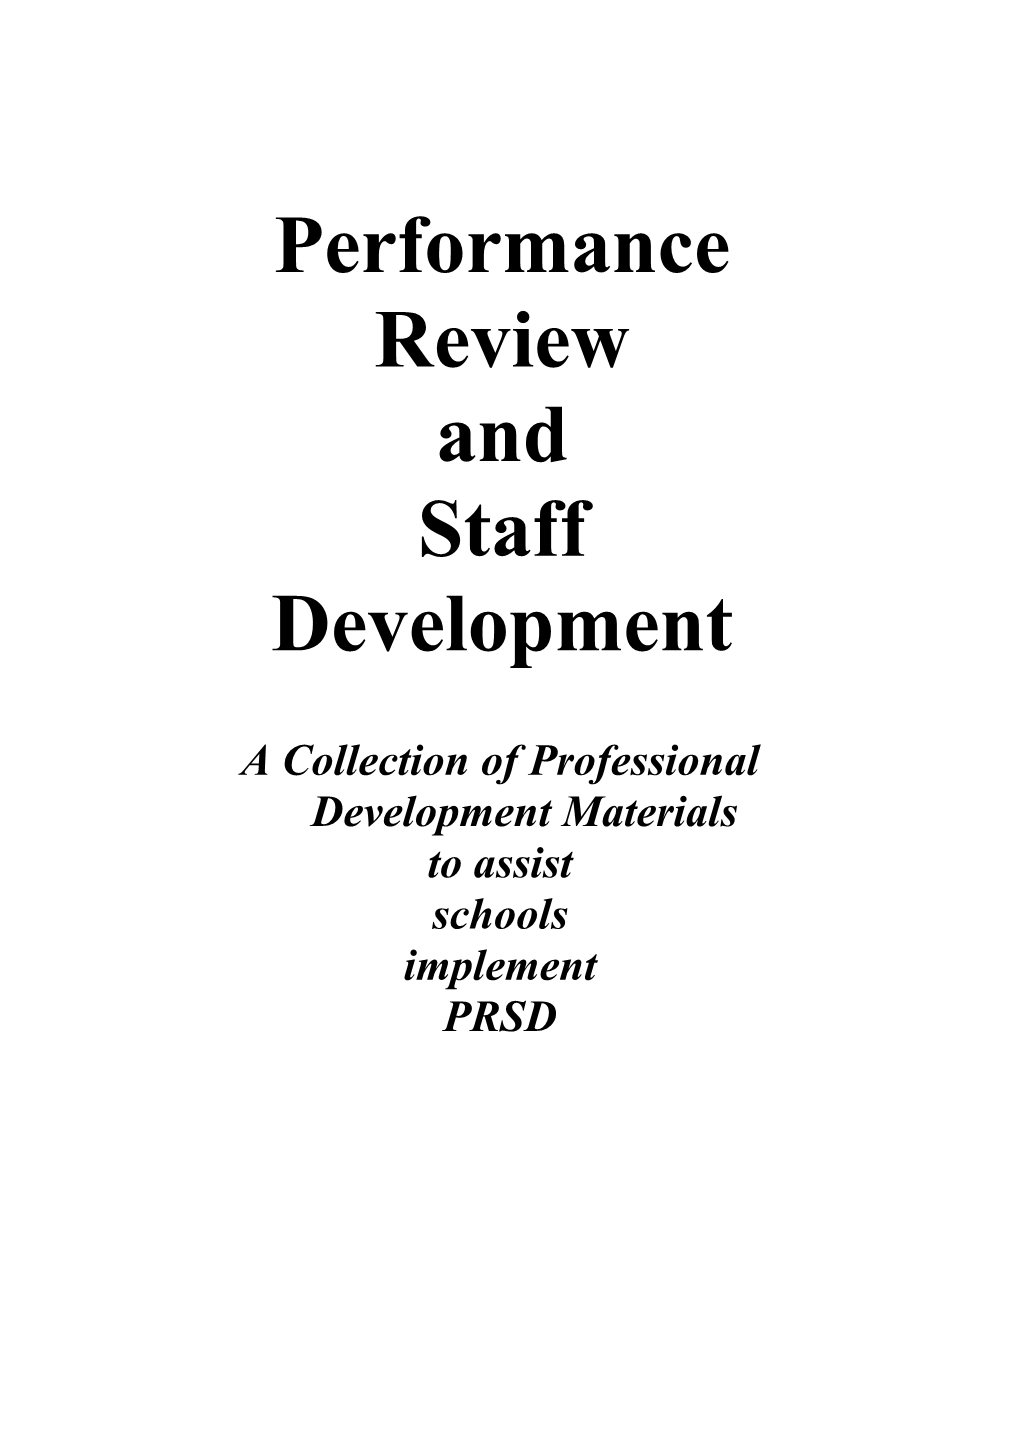 A Collection of Professional Development Materials